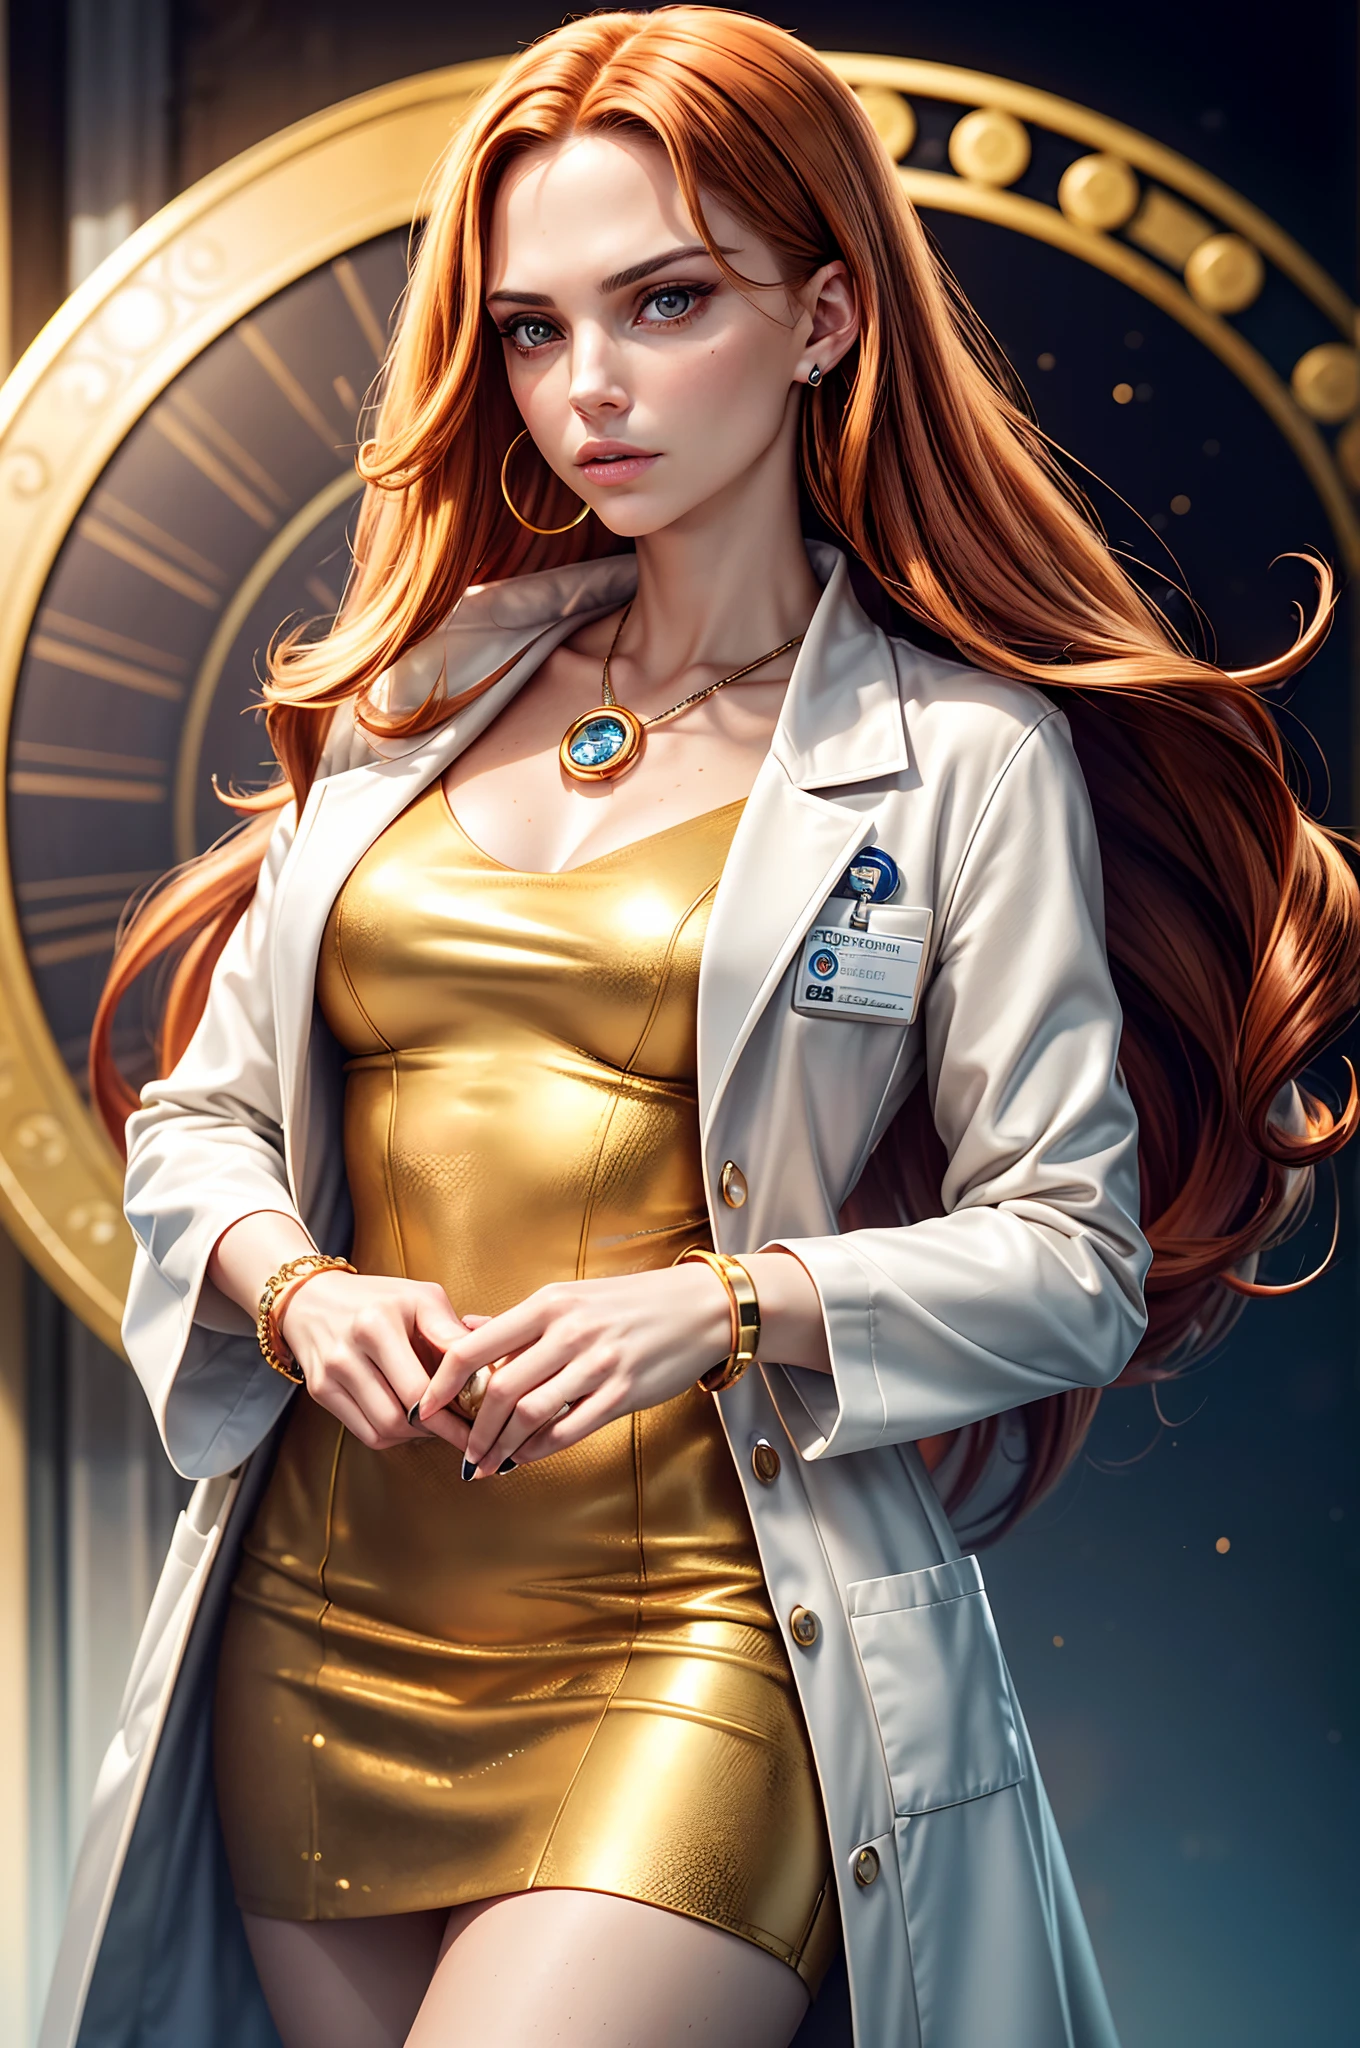 Flowing auburn hair, amber eyes, high cheekbones, facial blend of Natalie Portman, Zoe Saldana, and Charlize Theron, late-twenties female appearance, slightly freckled, lab coat bearing a golden helix emblem, mid-shot, neutral background, delicate bracelet with embedded micro-chip, holding a petri dish, digital ID badge clipped to coat